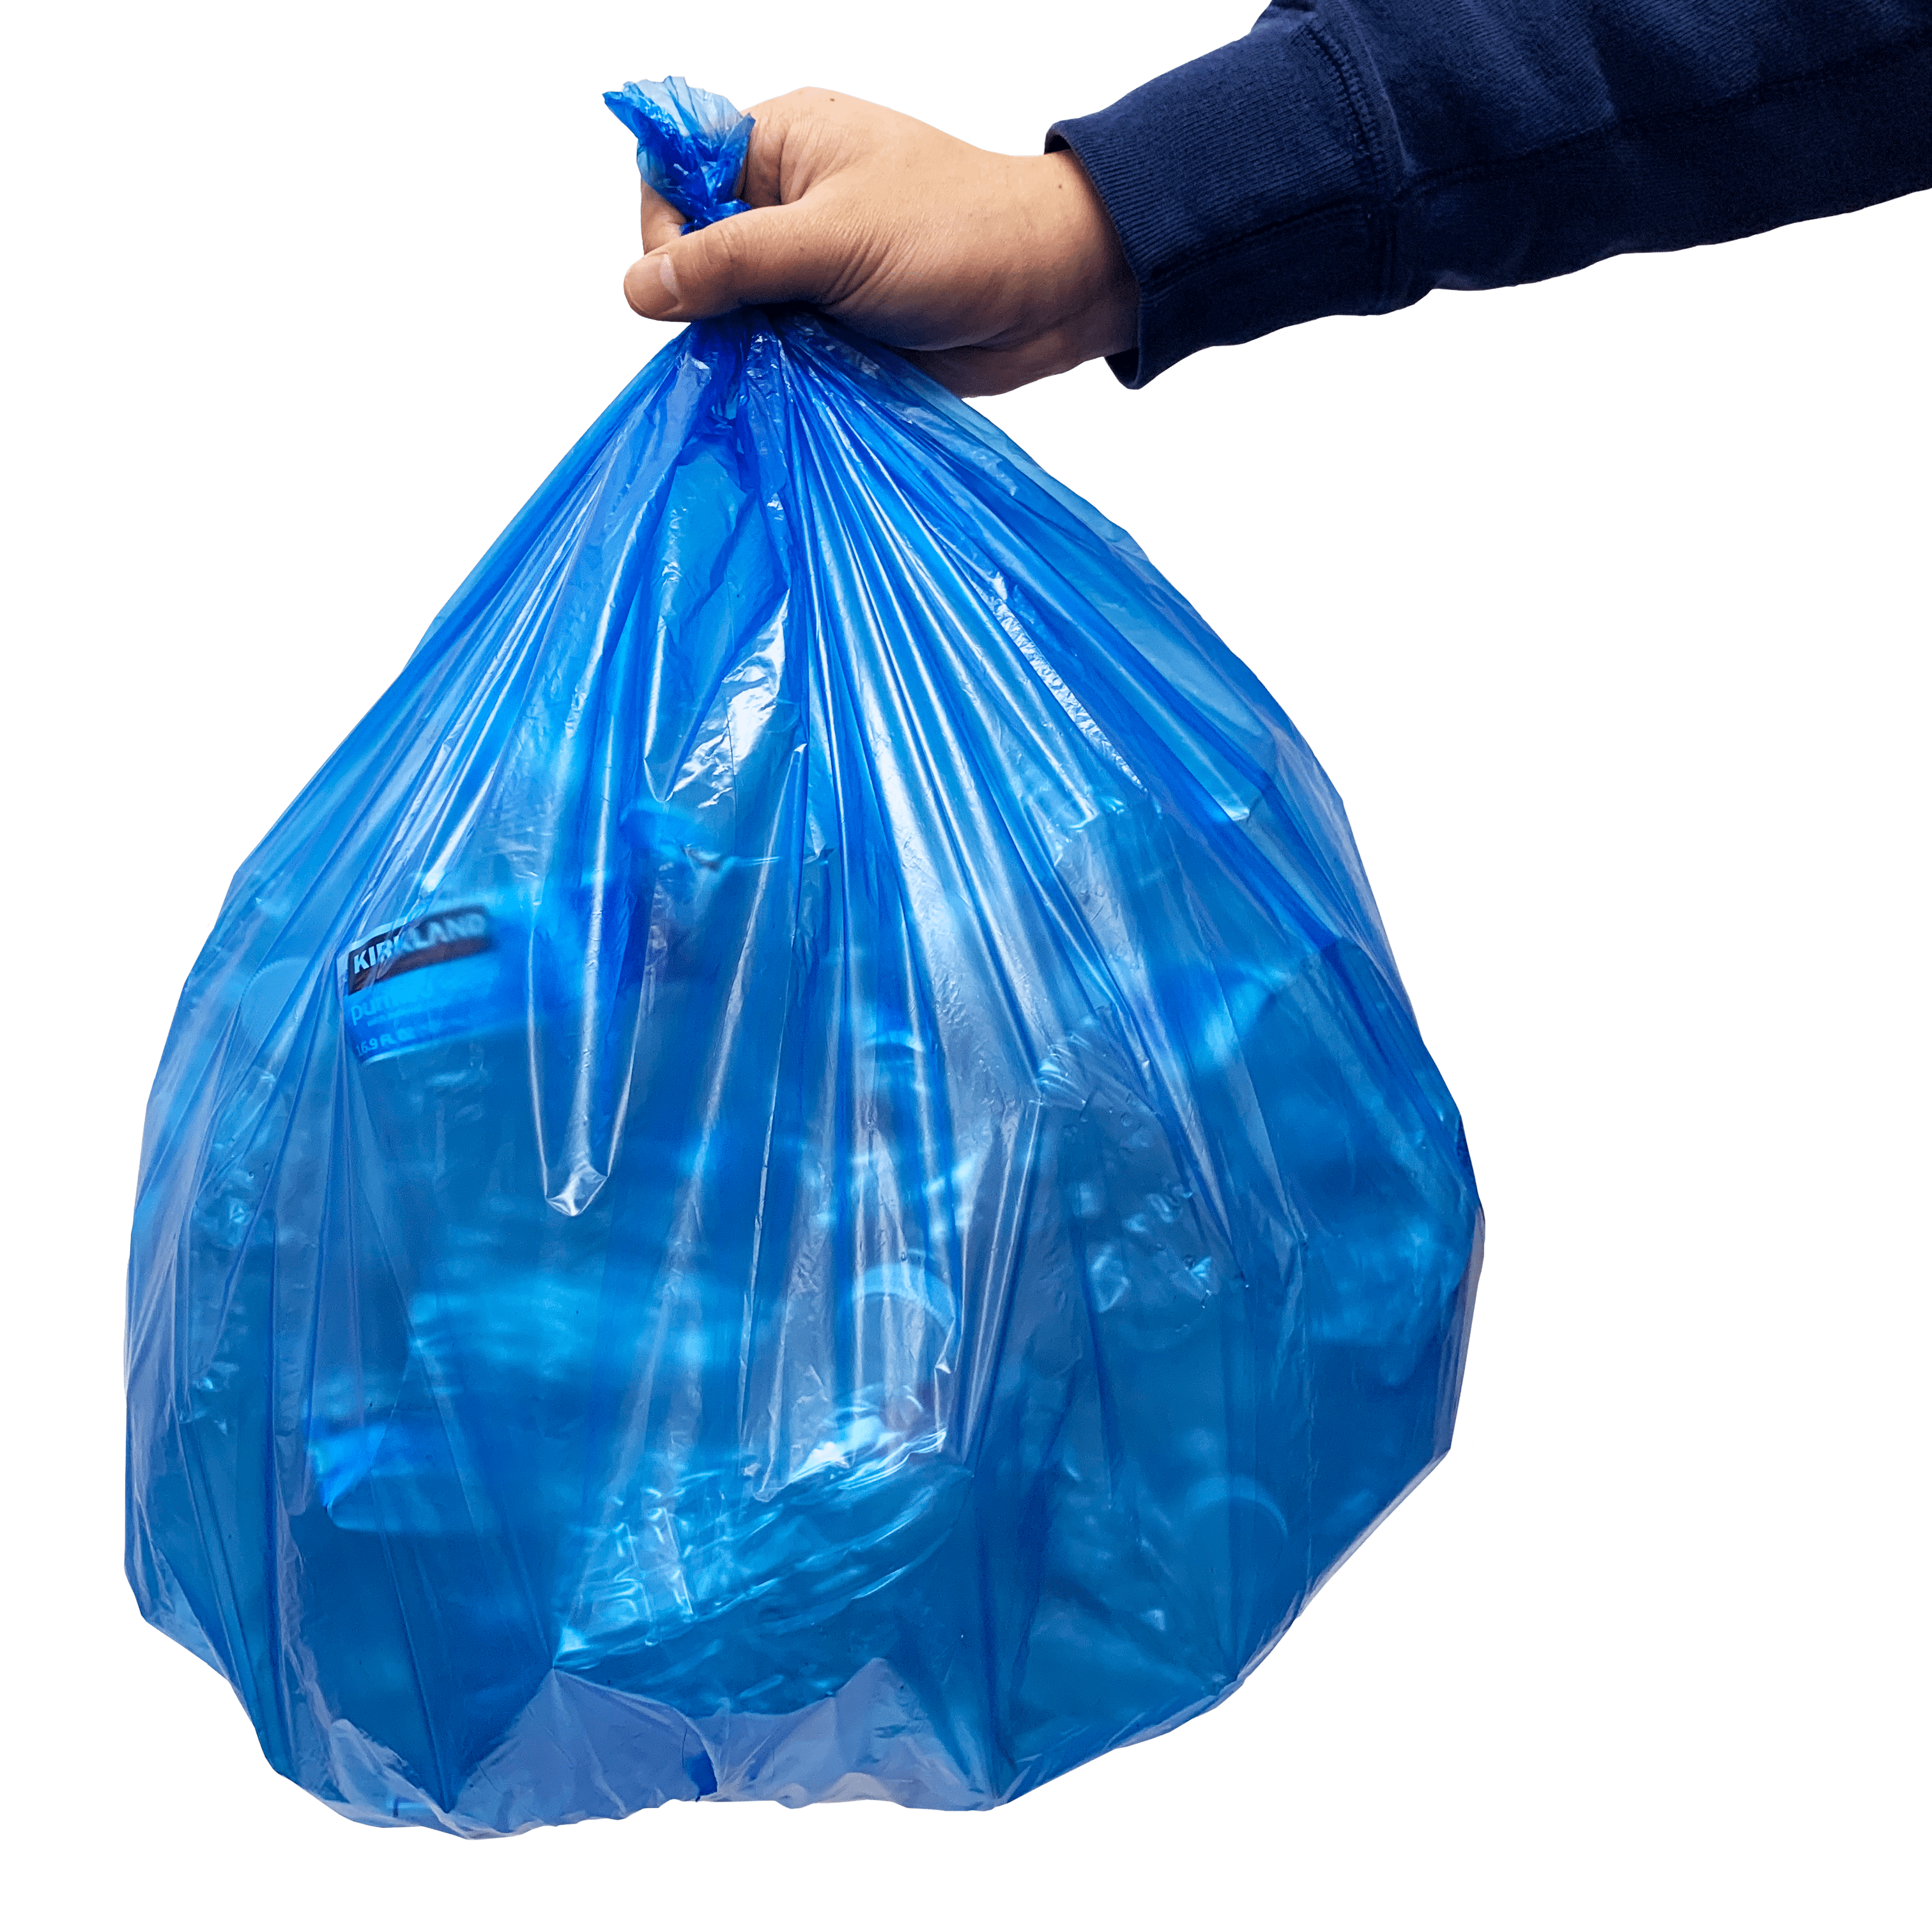 Blue Recycling Trash Bags 33Gallon By Primode – 100 Count Heavy Duty  Garbage Bag For Indoor Or Outdoor Use 33x39 MADE IN THE USA